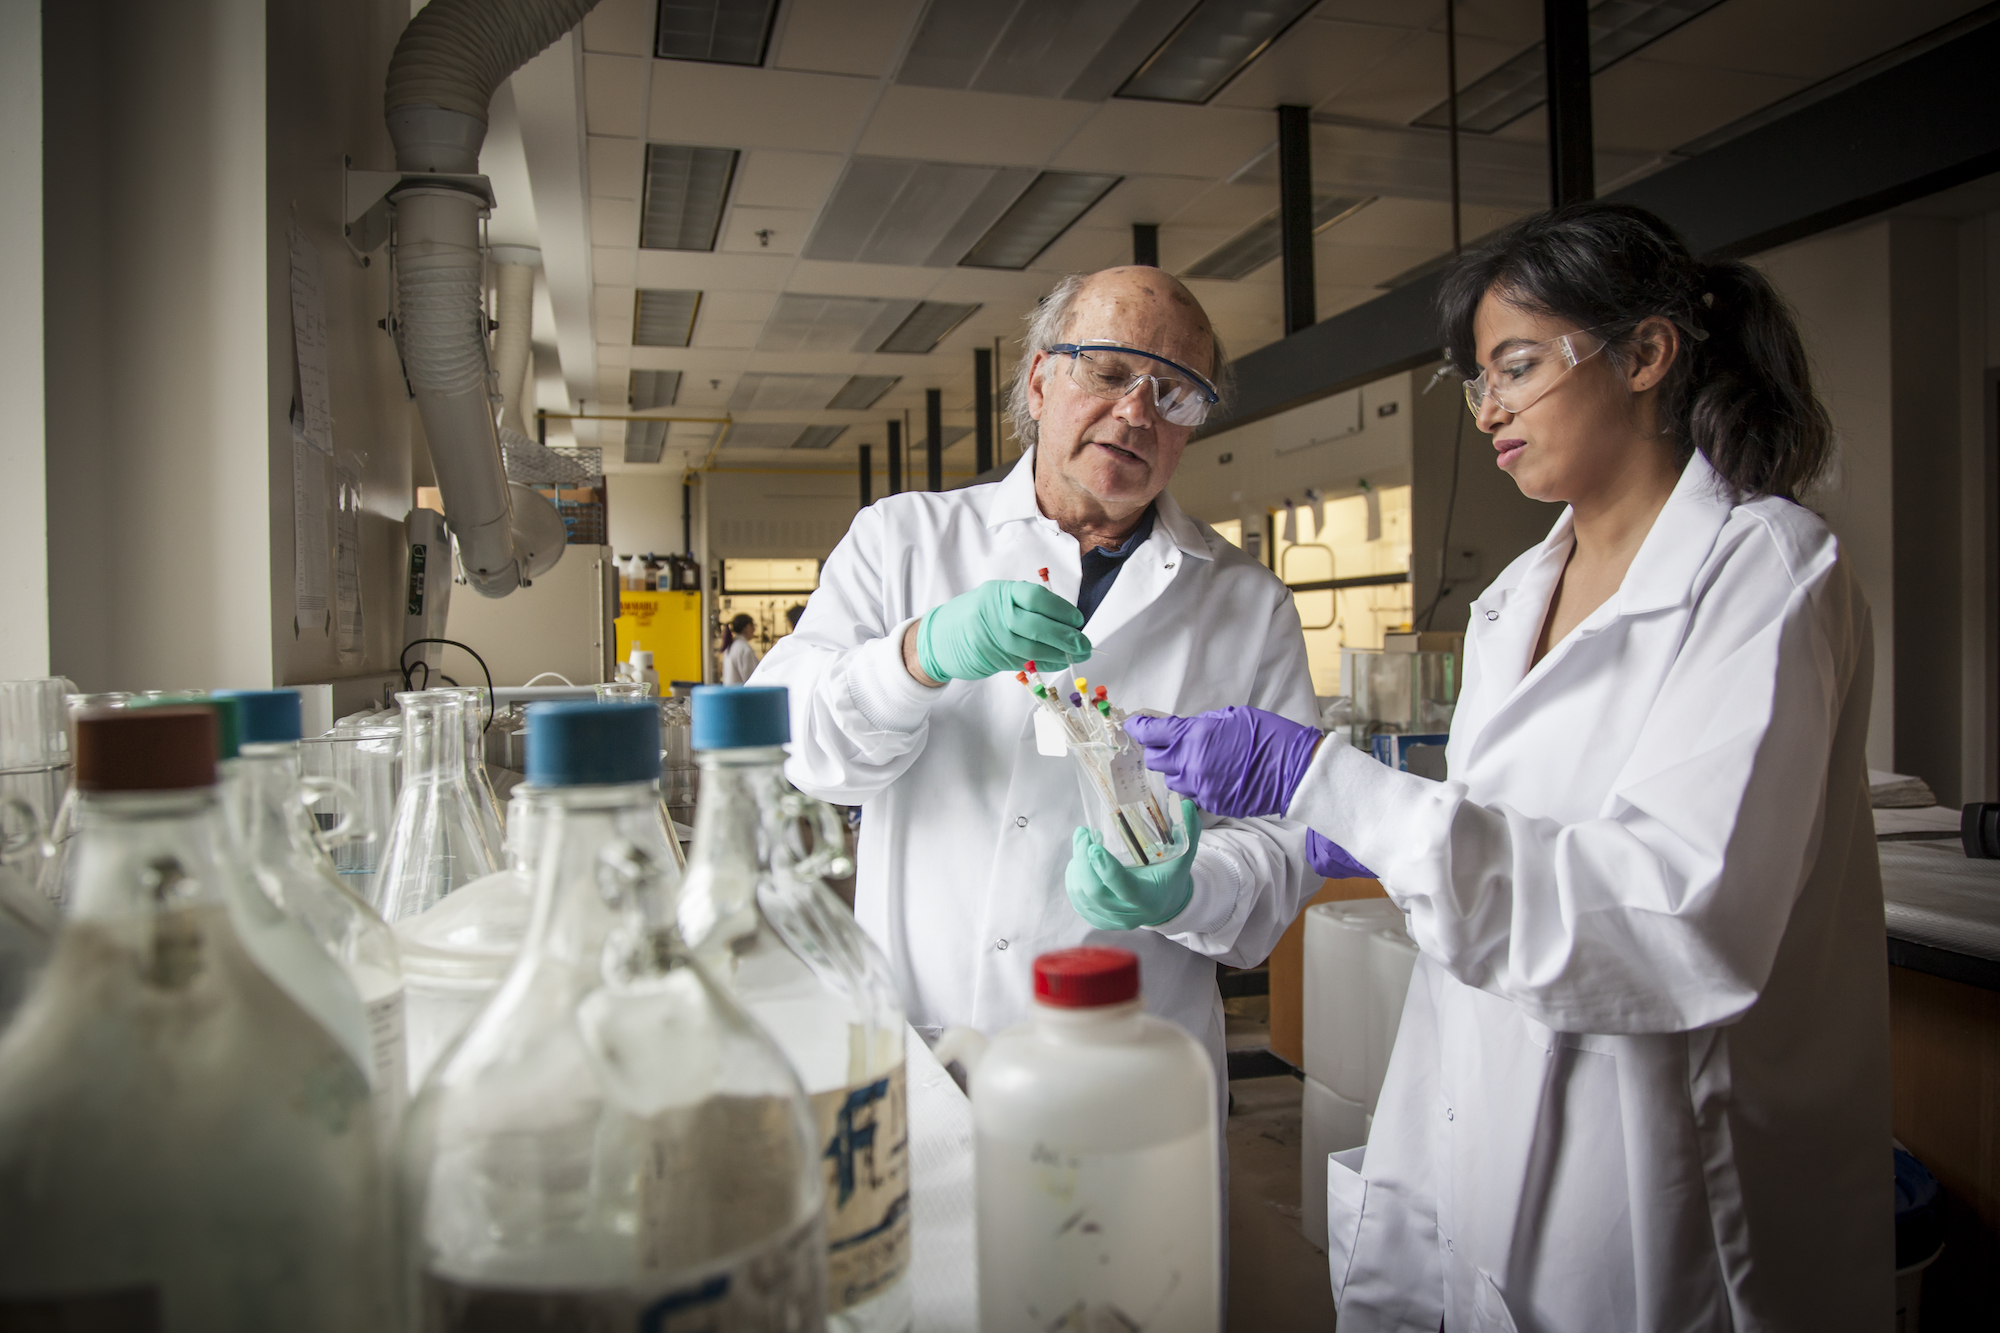 Dr. John Buynak demonstrating chemistry research technique with a student